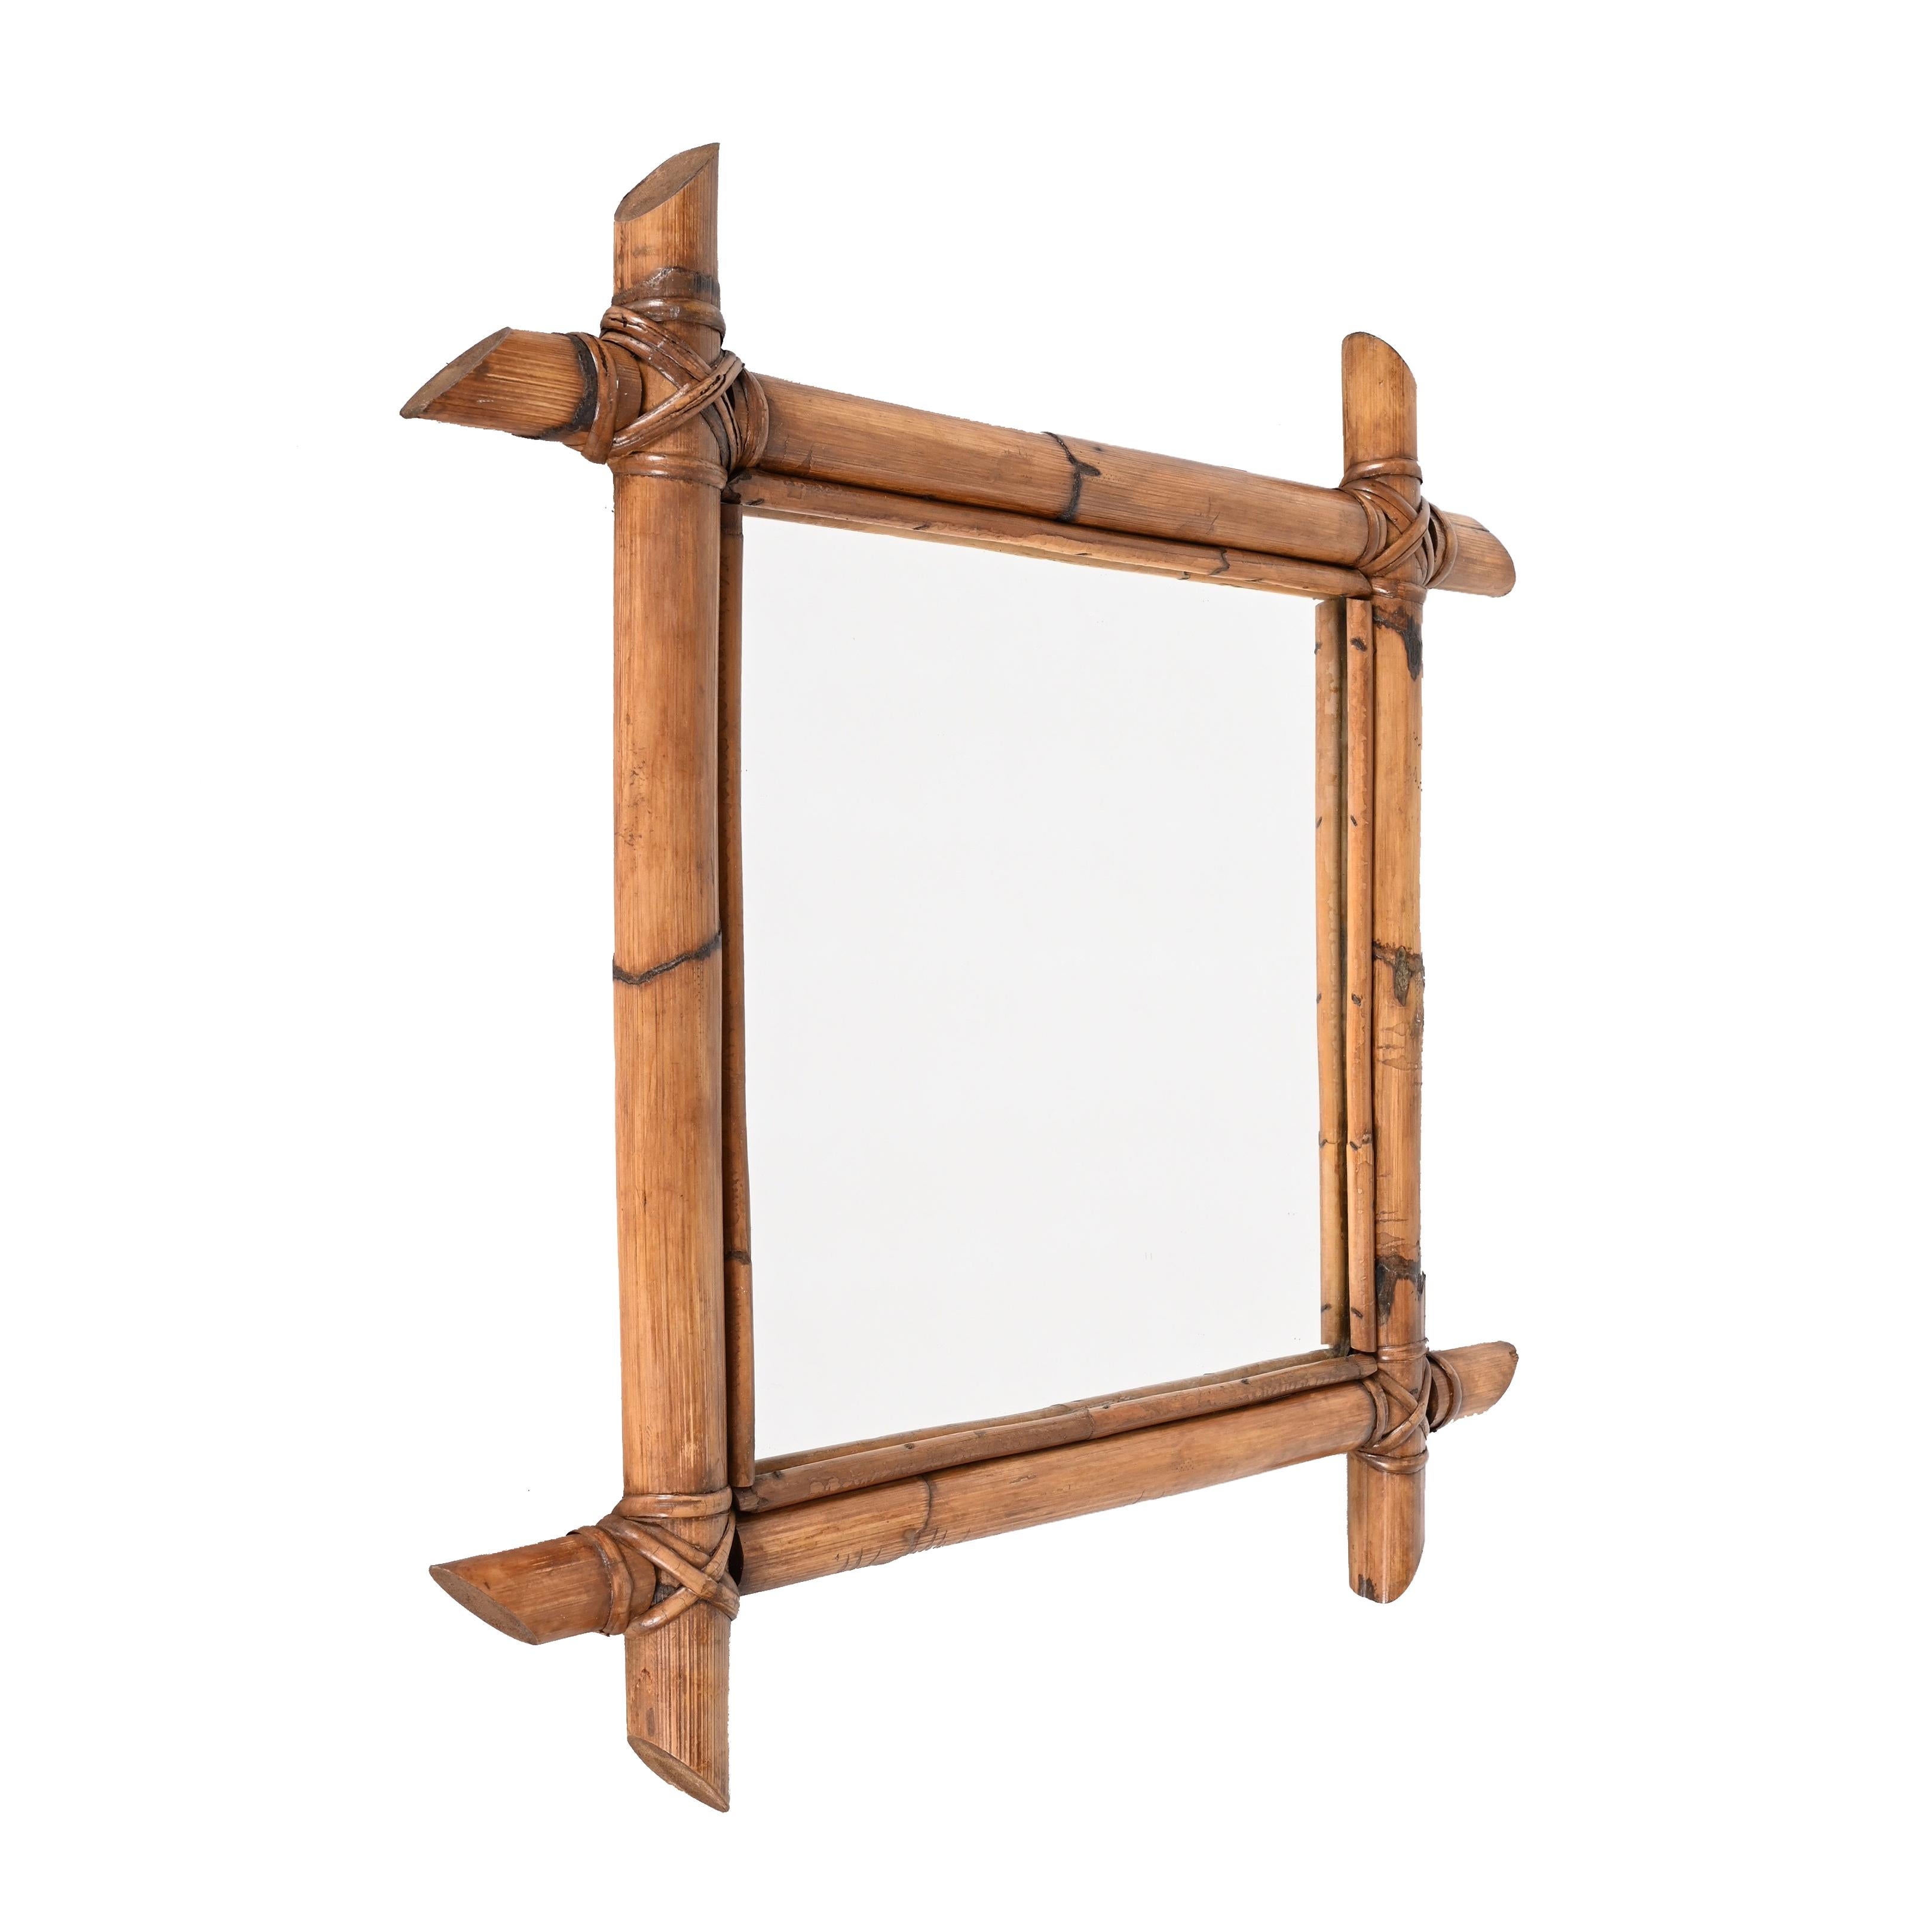 Midcentury Square Italian Mirror with Bamboo Woven Wicker Frame, 1950s For Sale 4